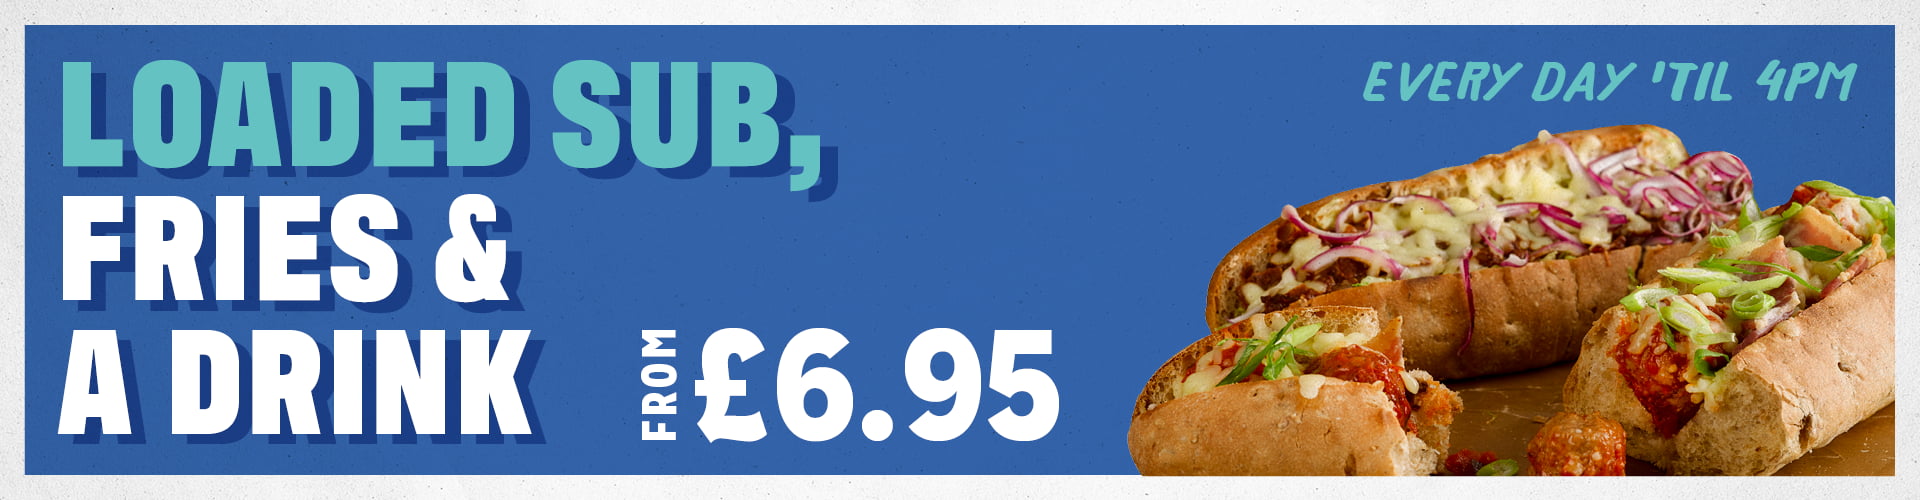 Loaded Sub, Fries & A Drink - From £6.95. Every Day Til 4pm.